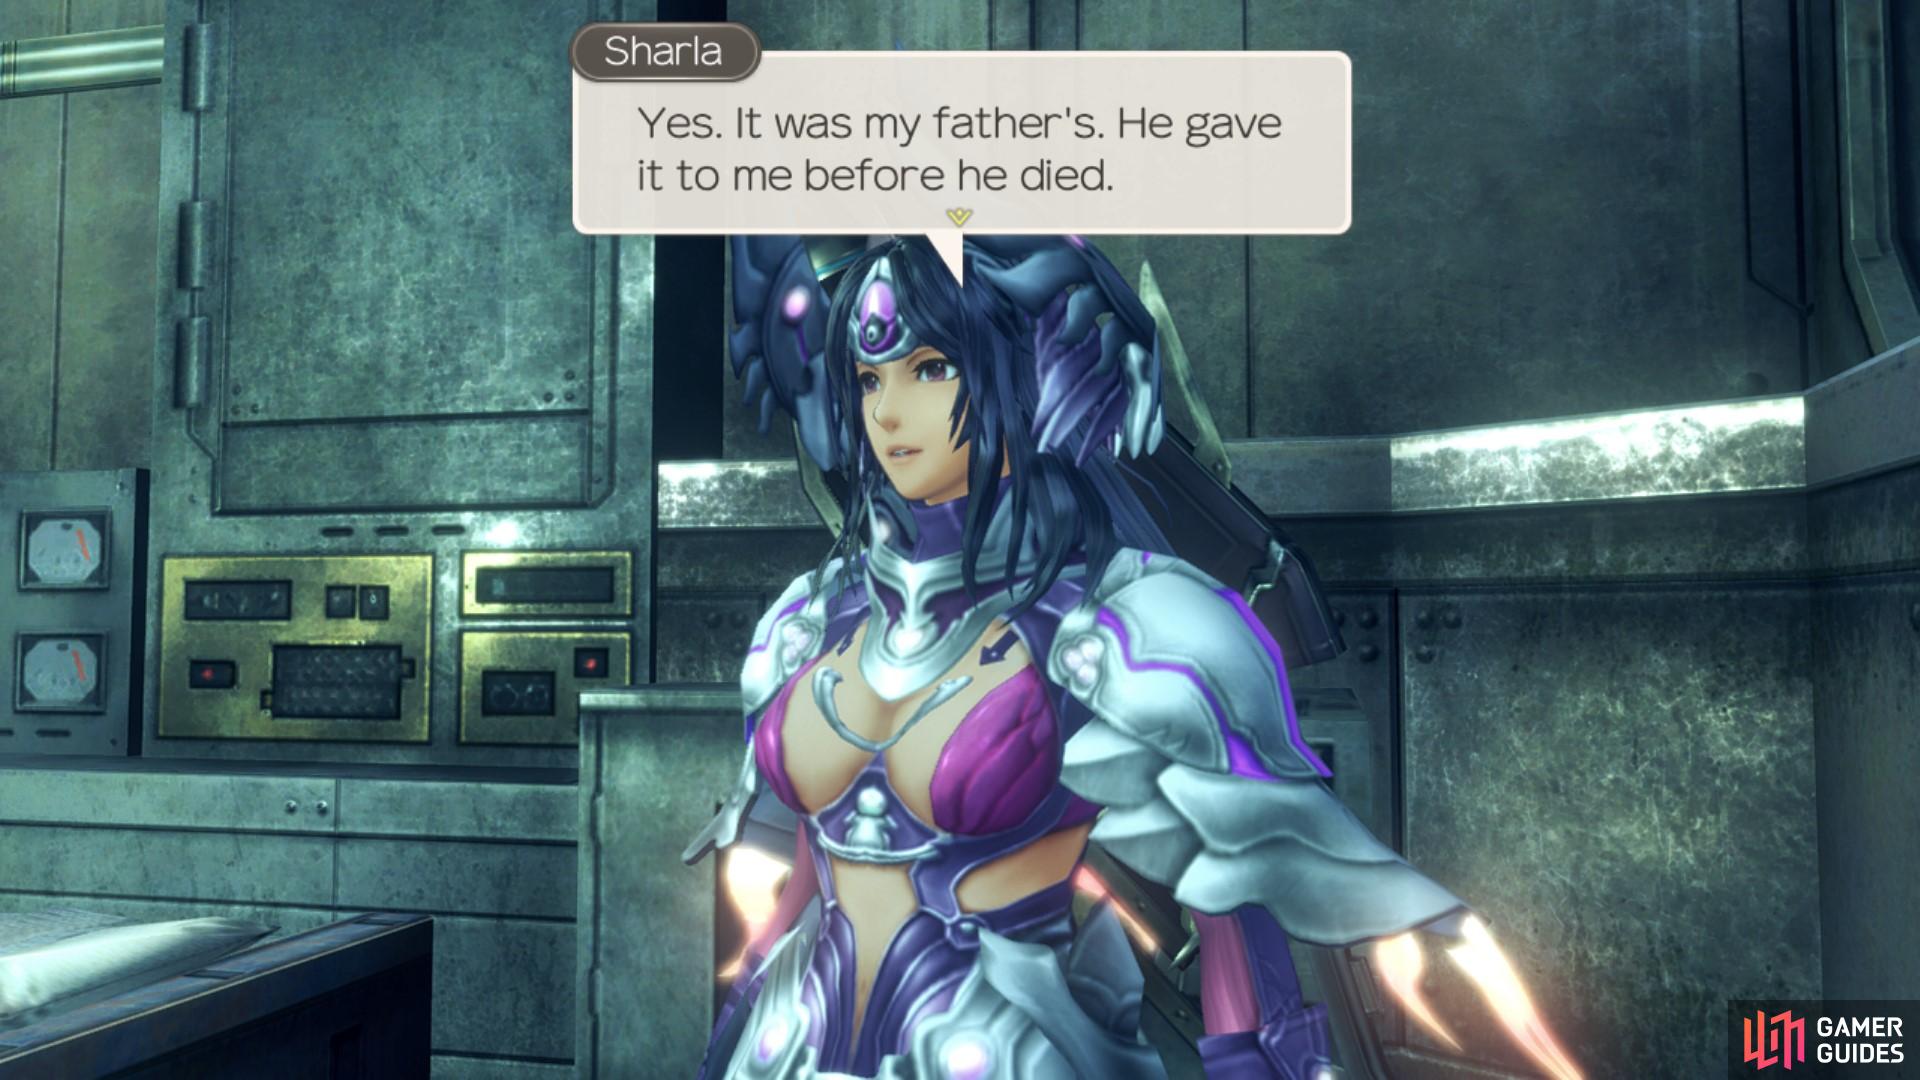 Shulk offers to fix Sharla’s watch for her.